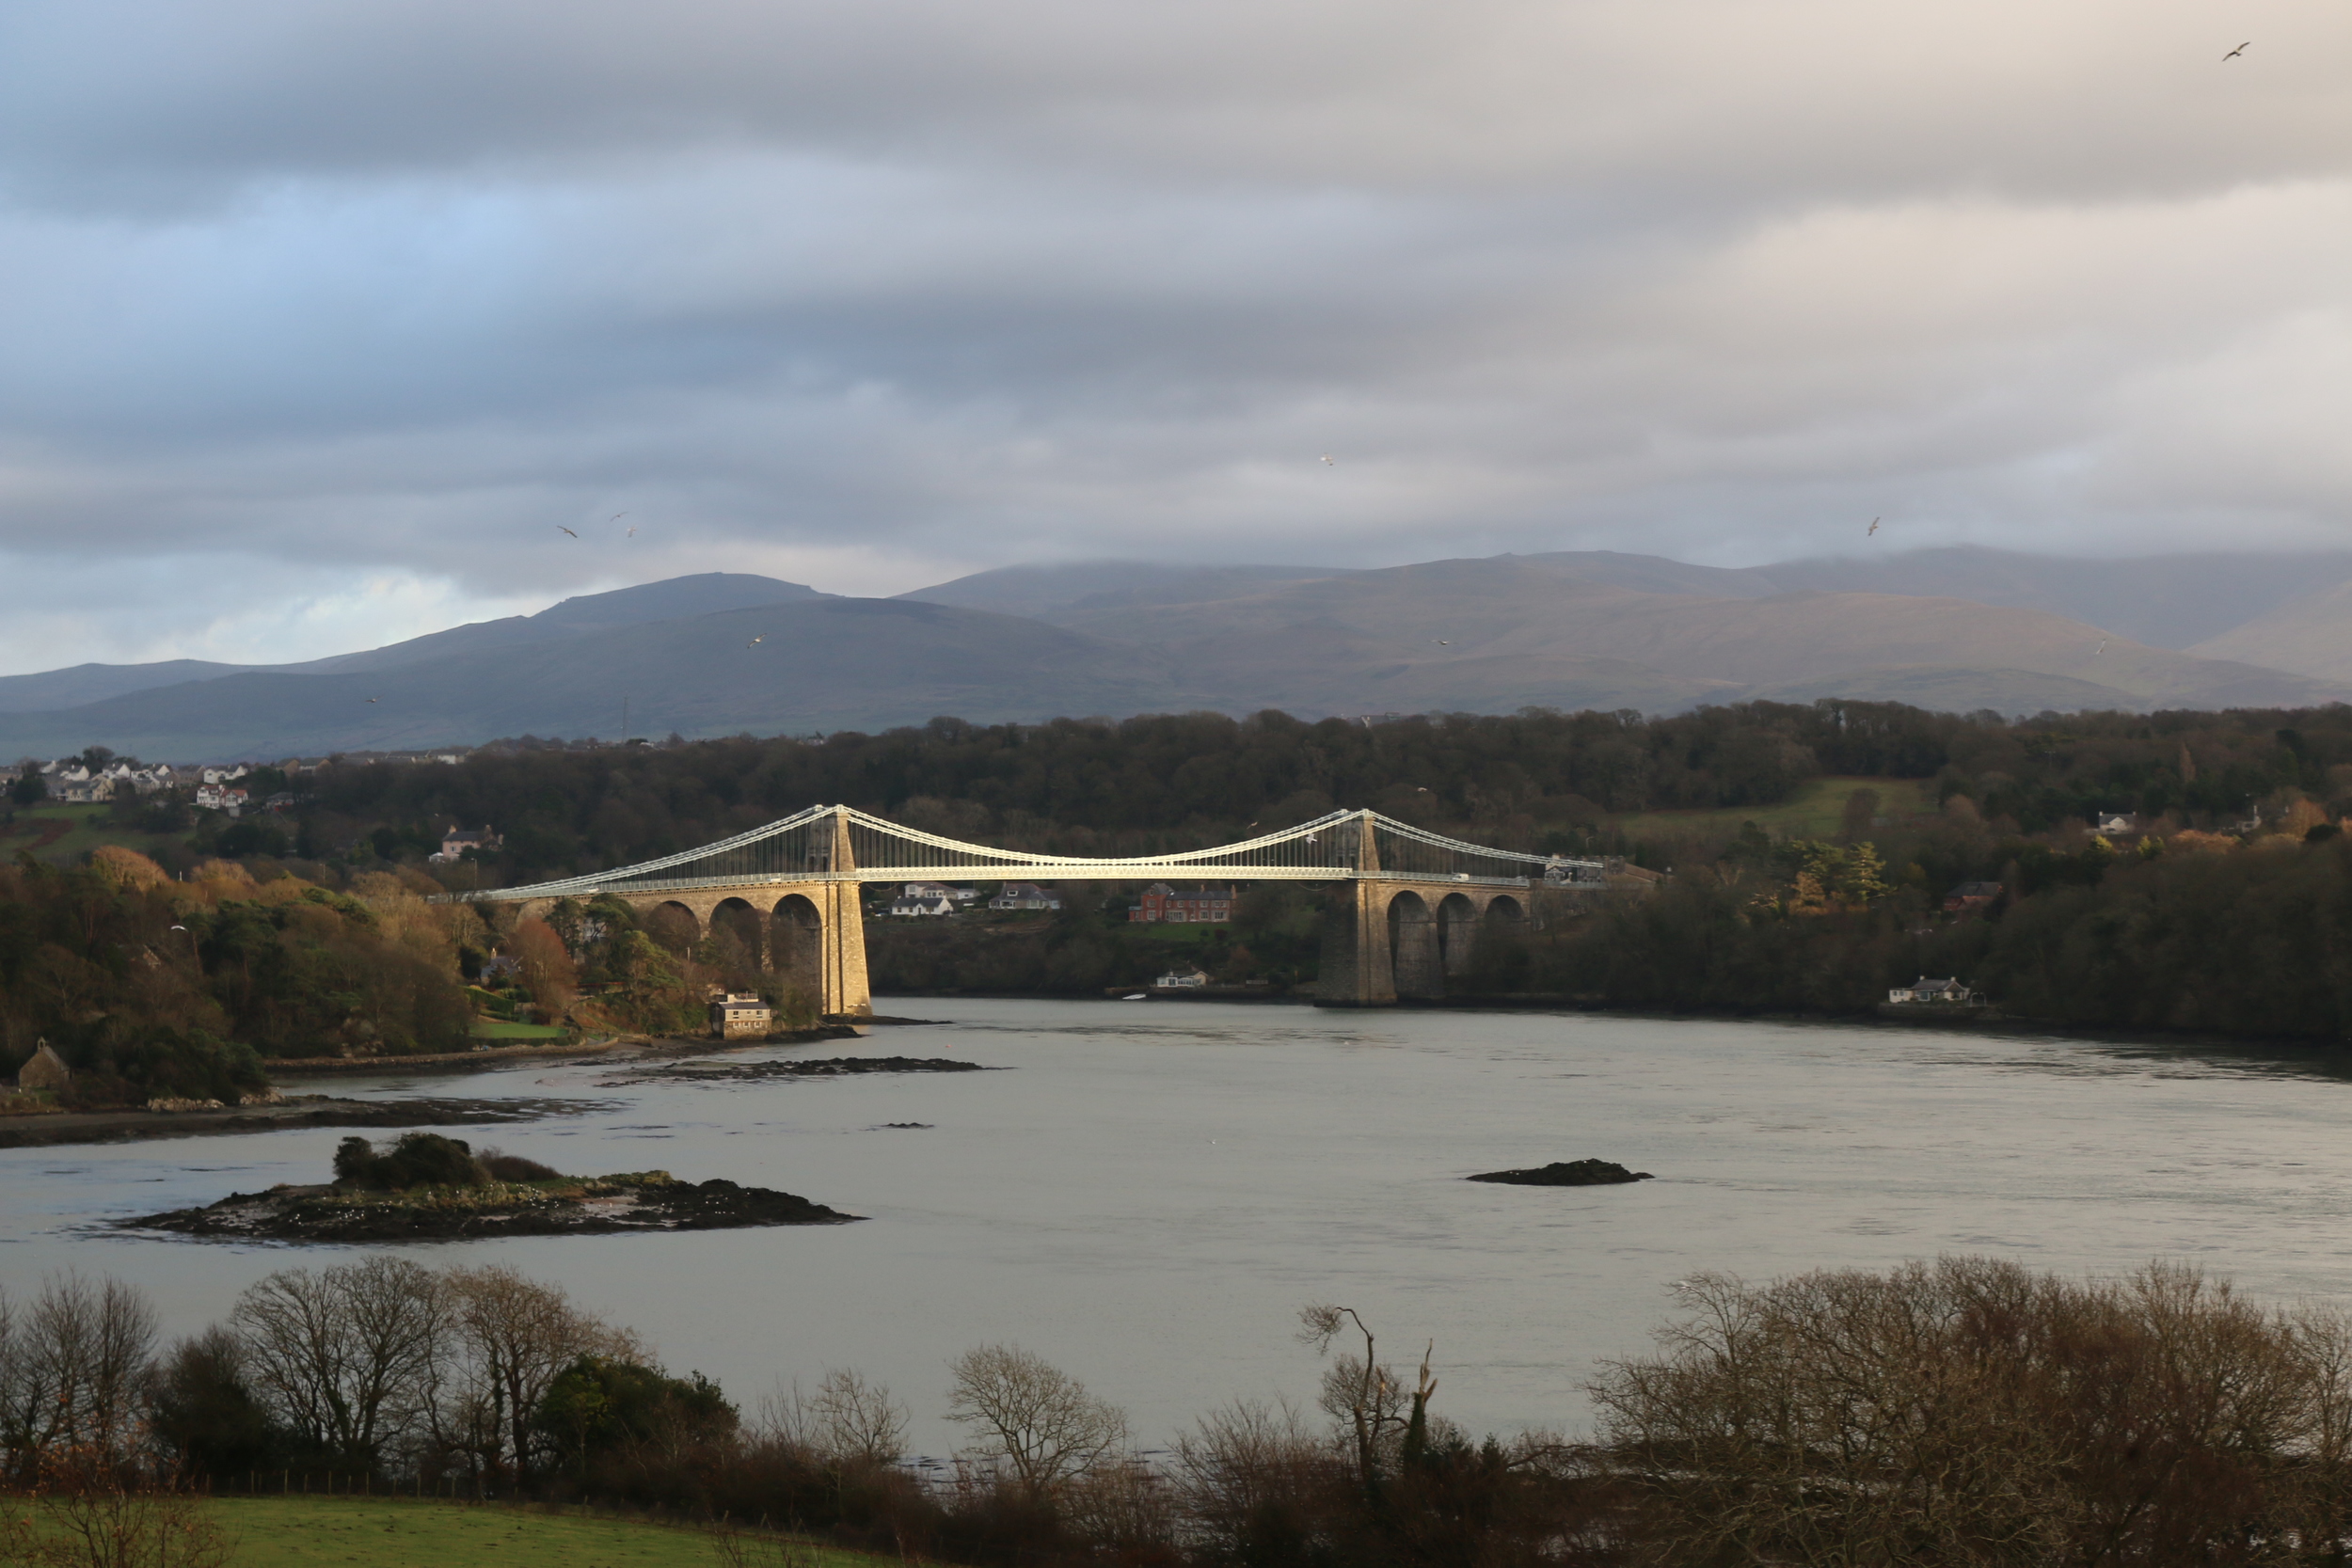 Menai Suspension Bridge: connecting Anglesey to mainland Wales and designed by Thomas Telford.